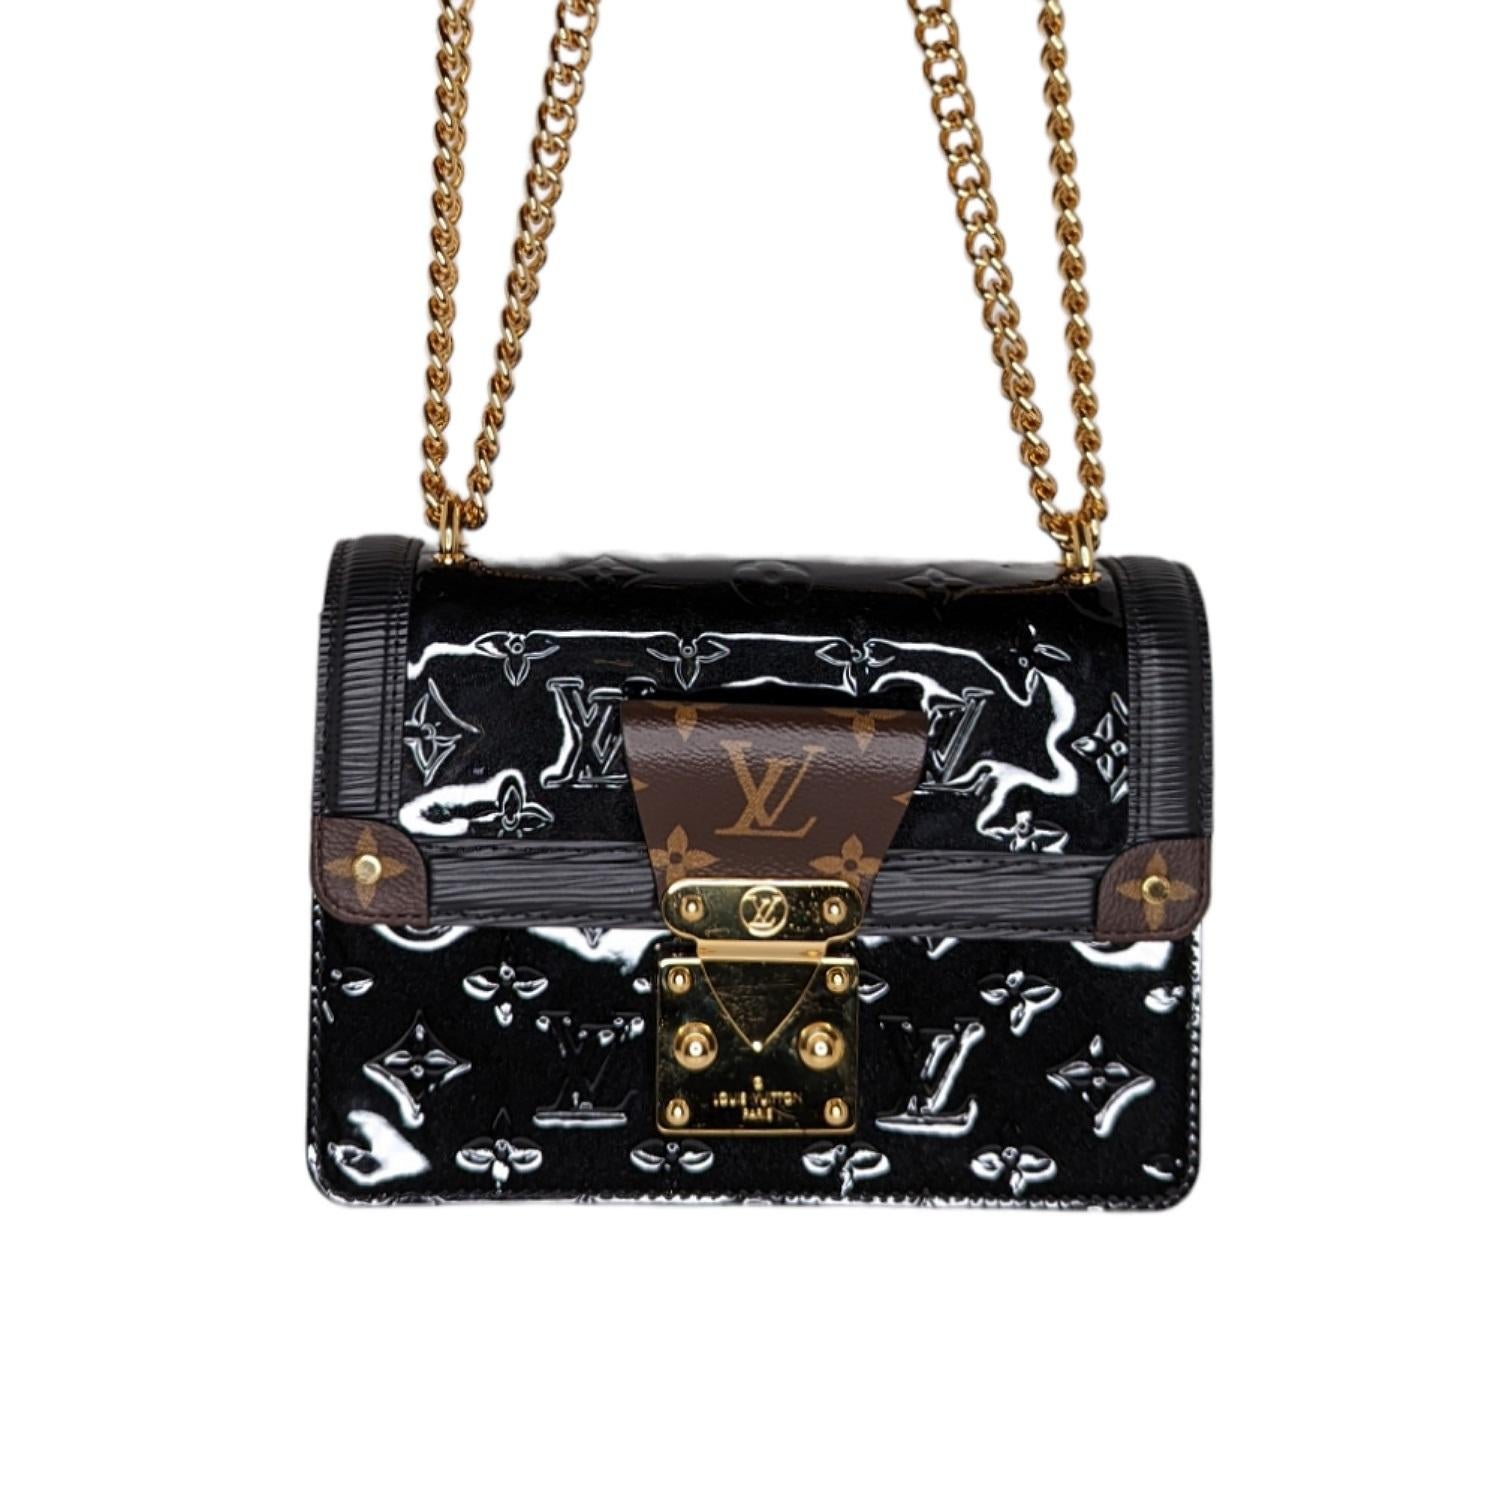 The LV Wynwood chain bag unites three emblematic House materials: glossy, glamorous Monogram Vernis patent leather, textured Epi leather and Monogram canvas. The result is a modern classic, an essential piece for an elegant woman’s handbag